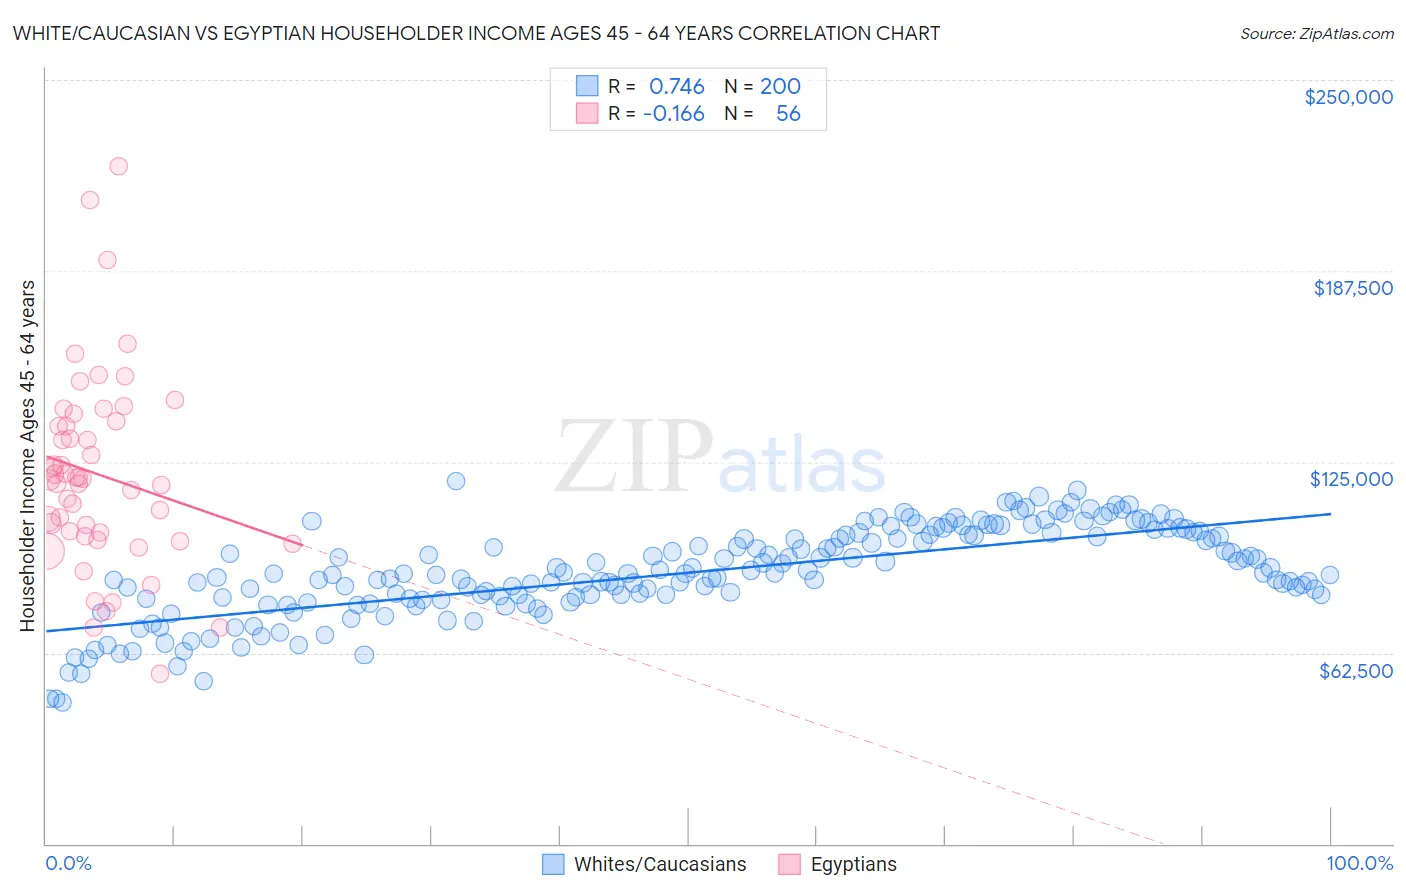 White/Caucasian vs Egyptian Householder Income Ages 45 - 64 years